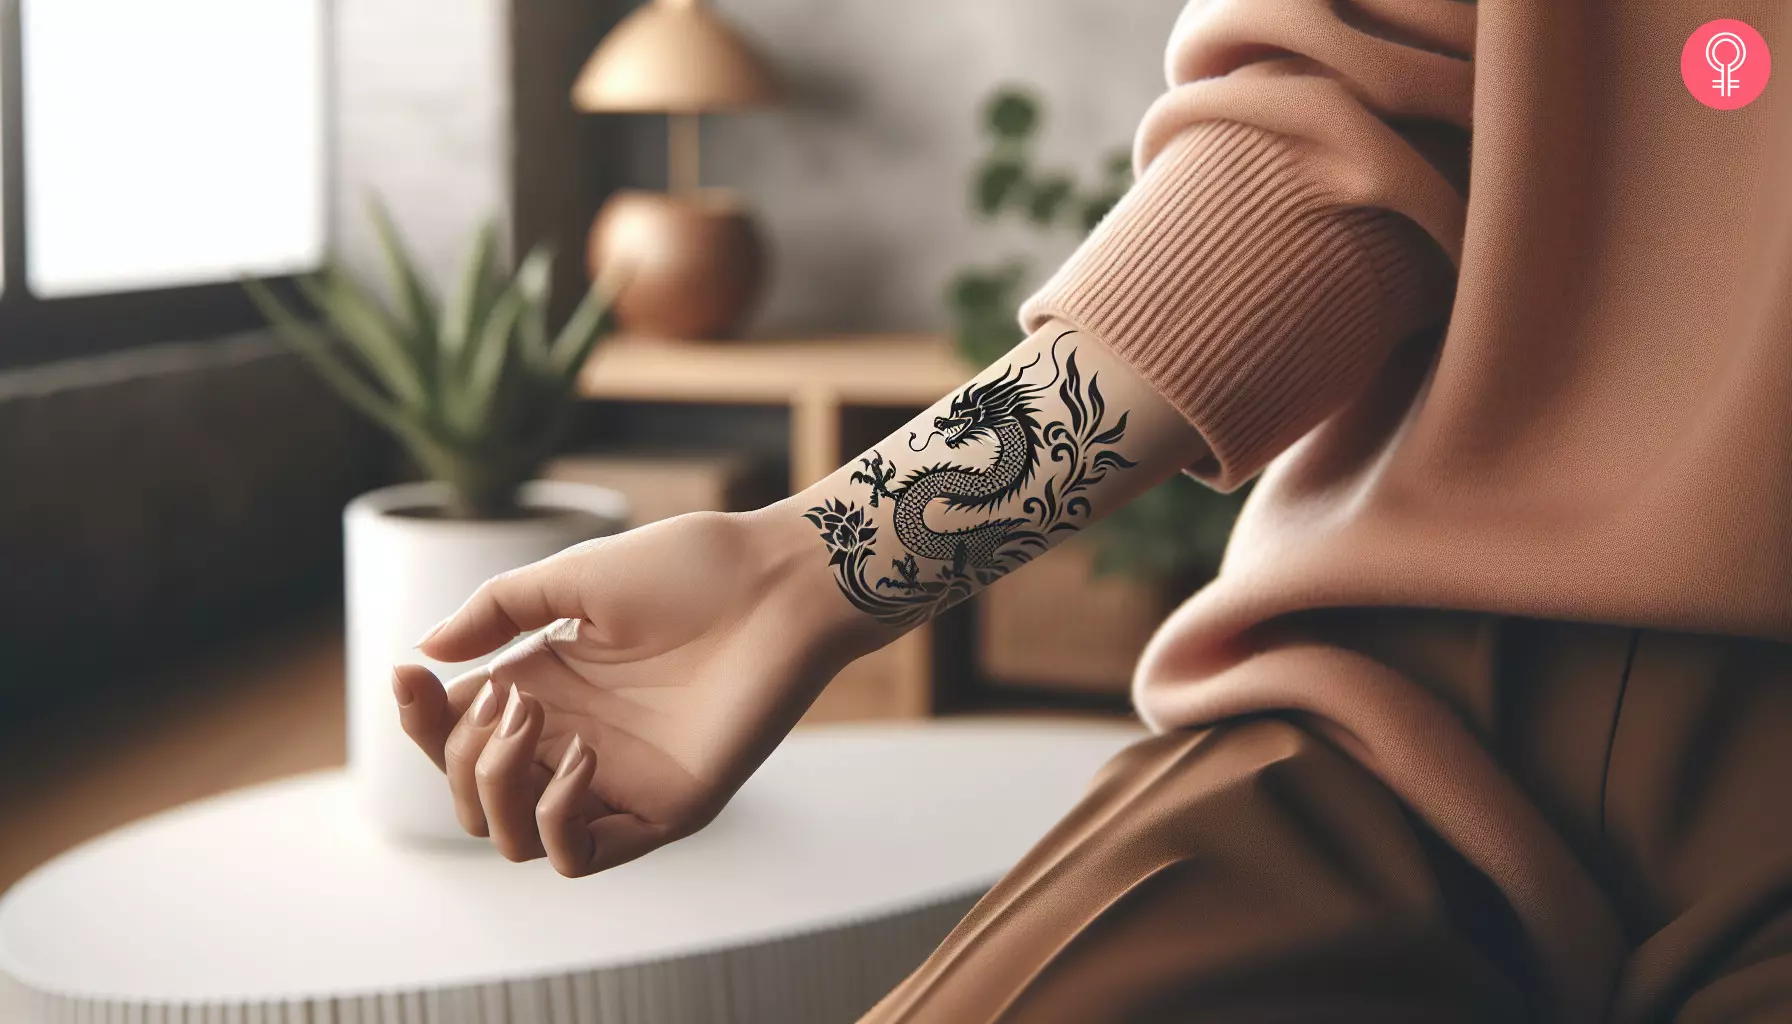 A small dragon tattoo design on the wrist of a woman